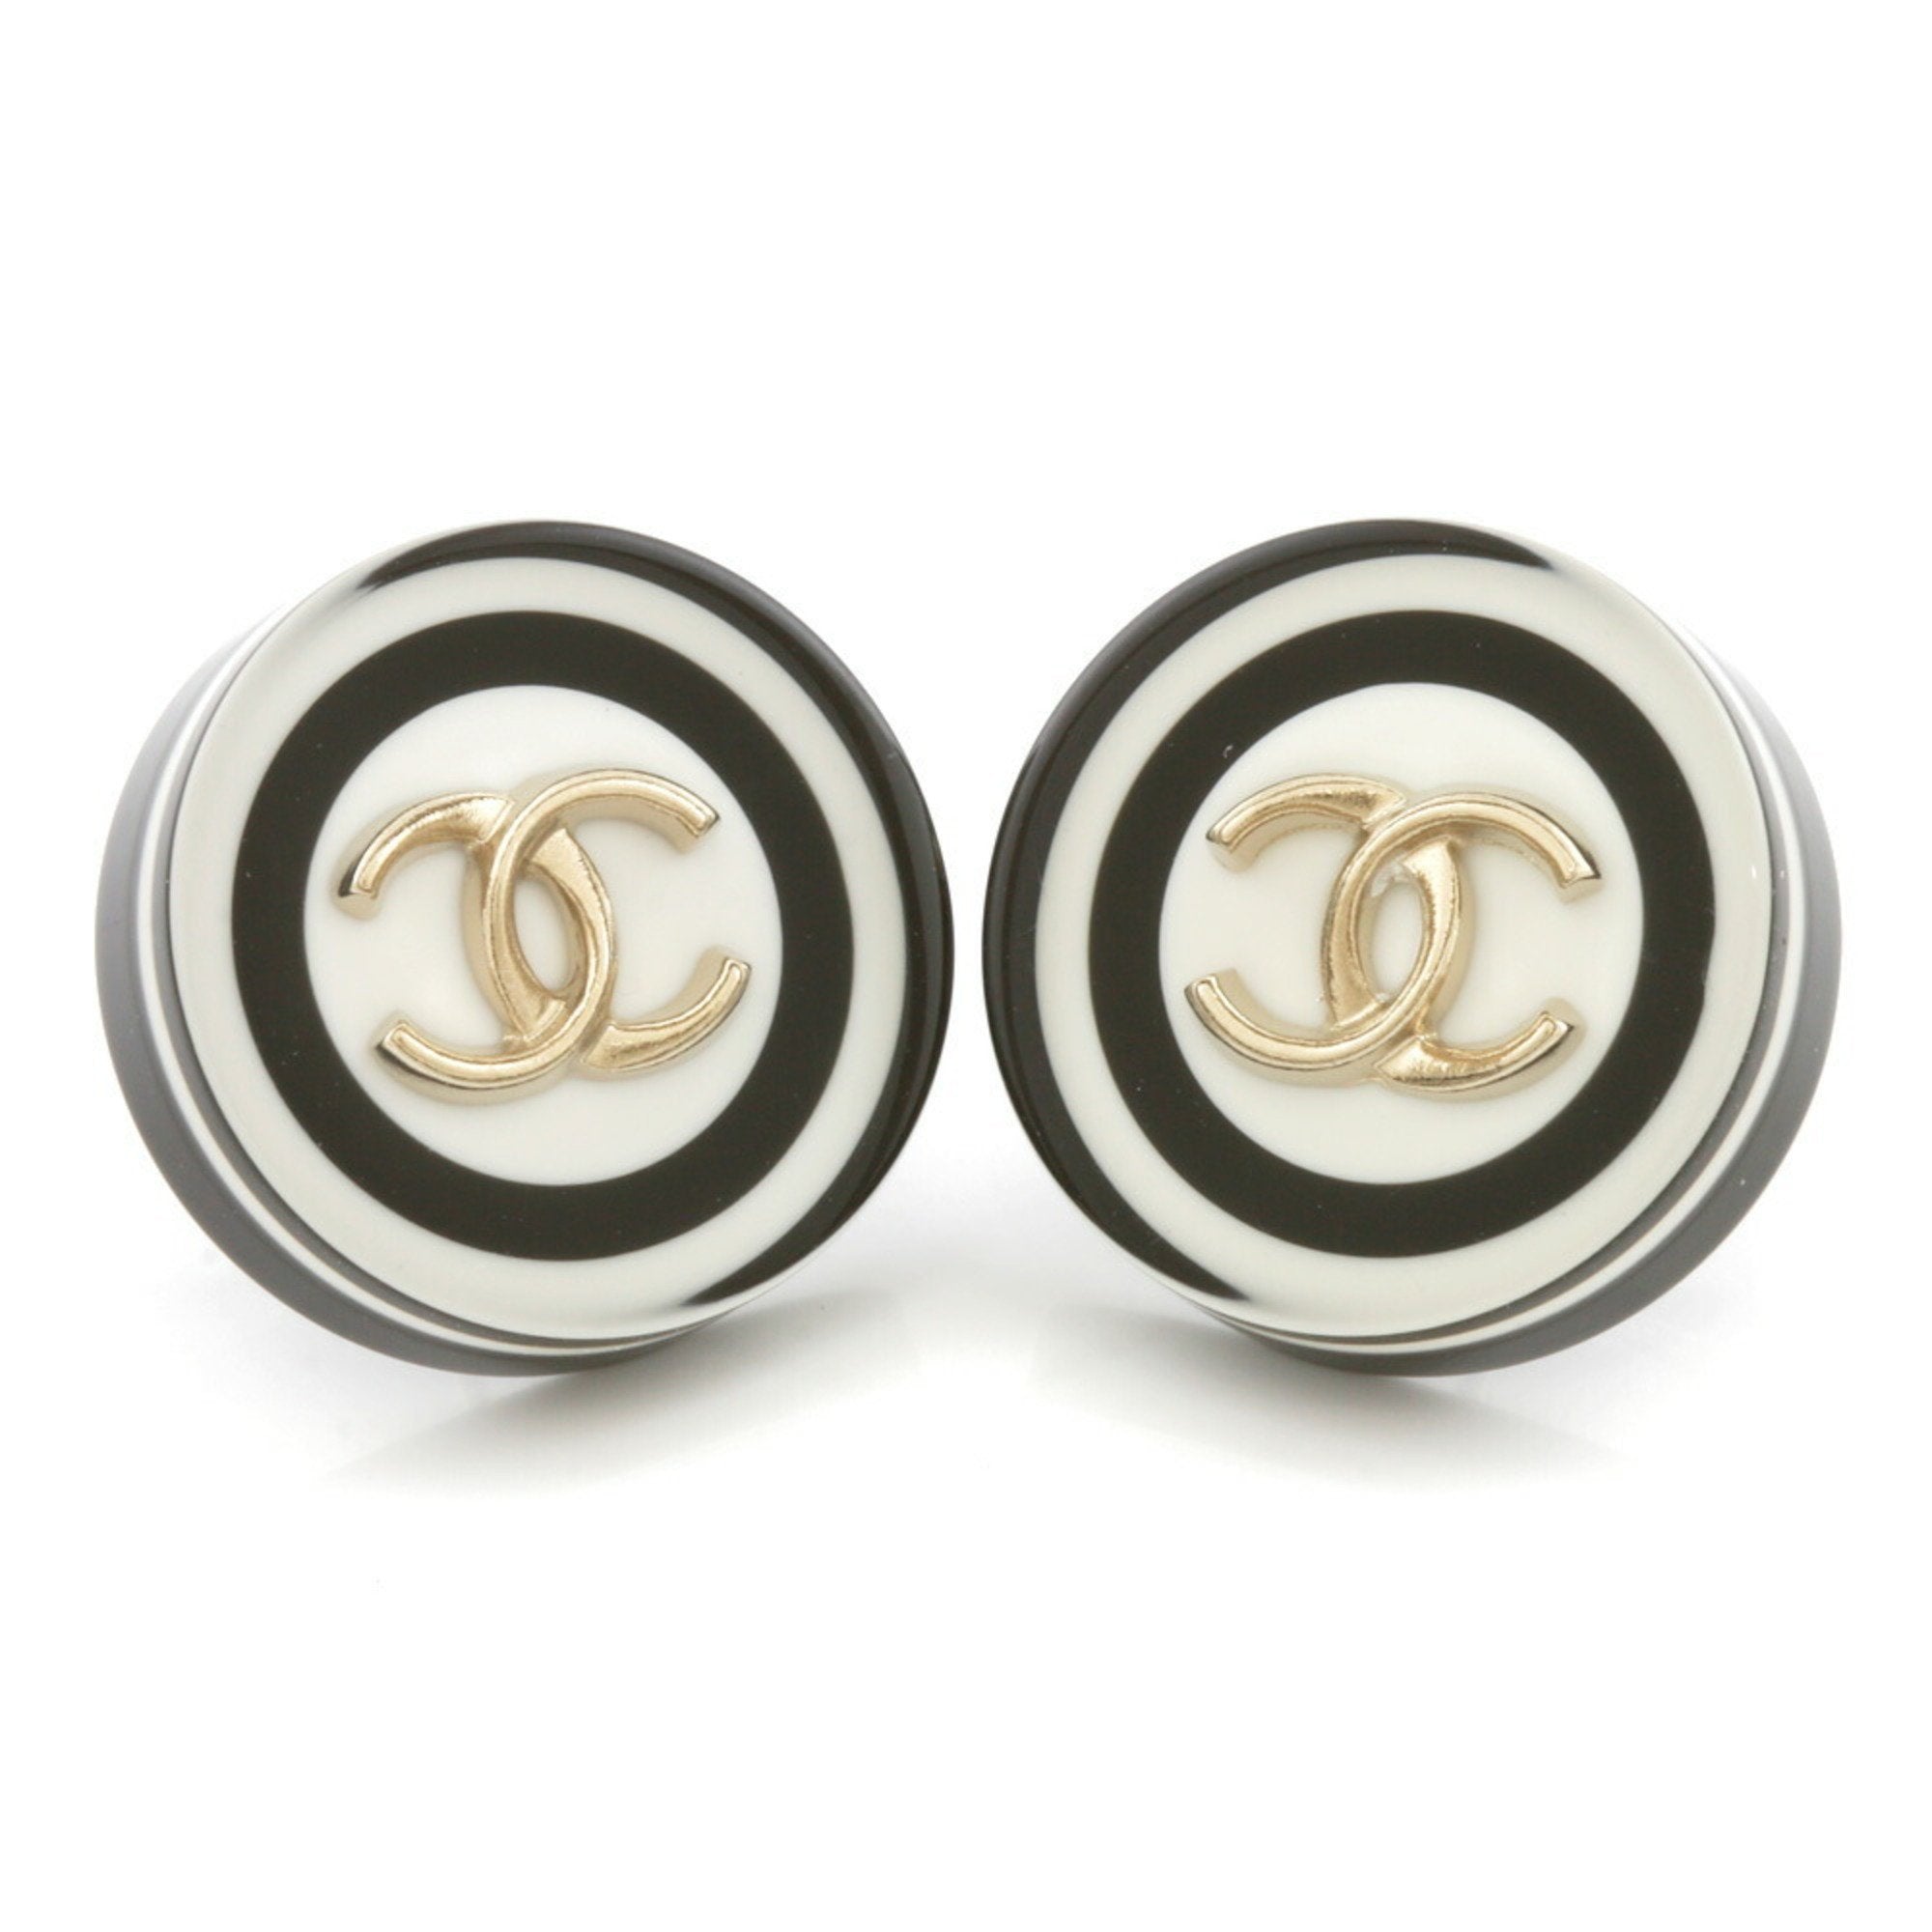 Chanel Earrings Coco Mark Round Black White Gold Ladies Metal